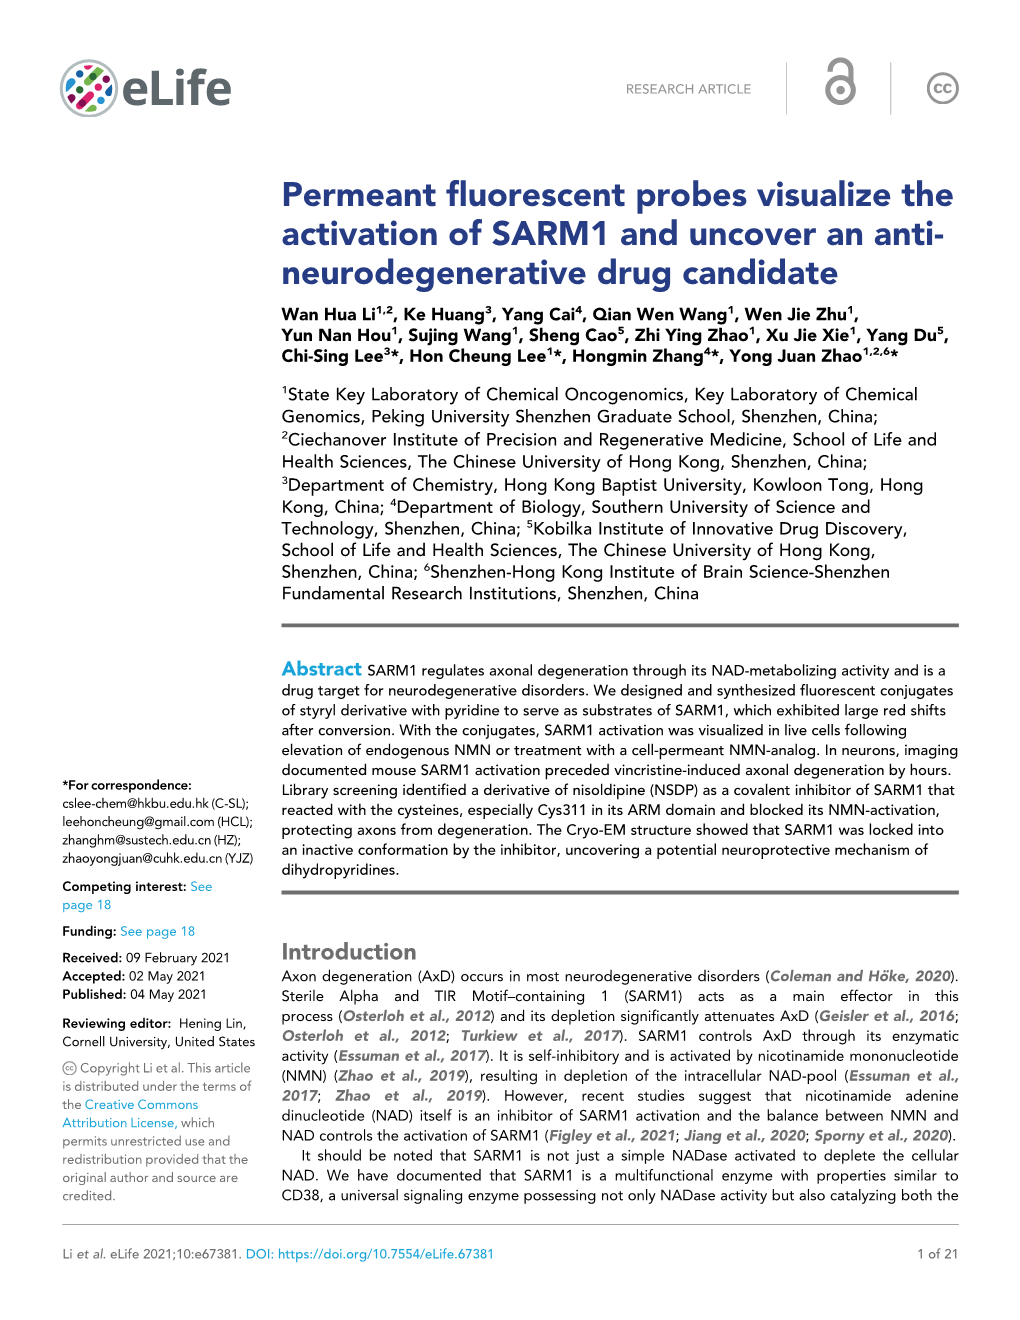 Permeant Fluorescent Probes Visualize the Activation of SARM1 And